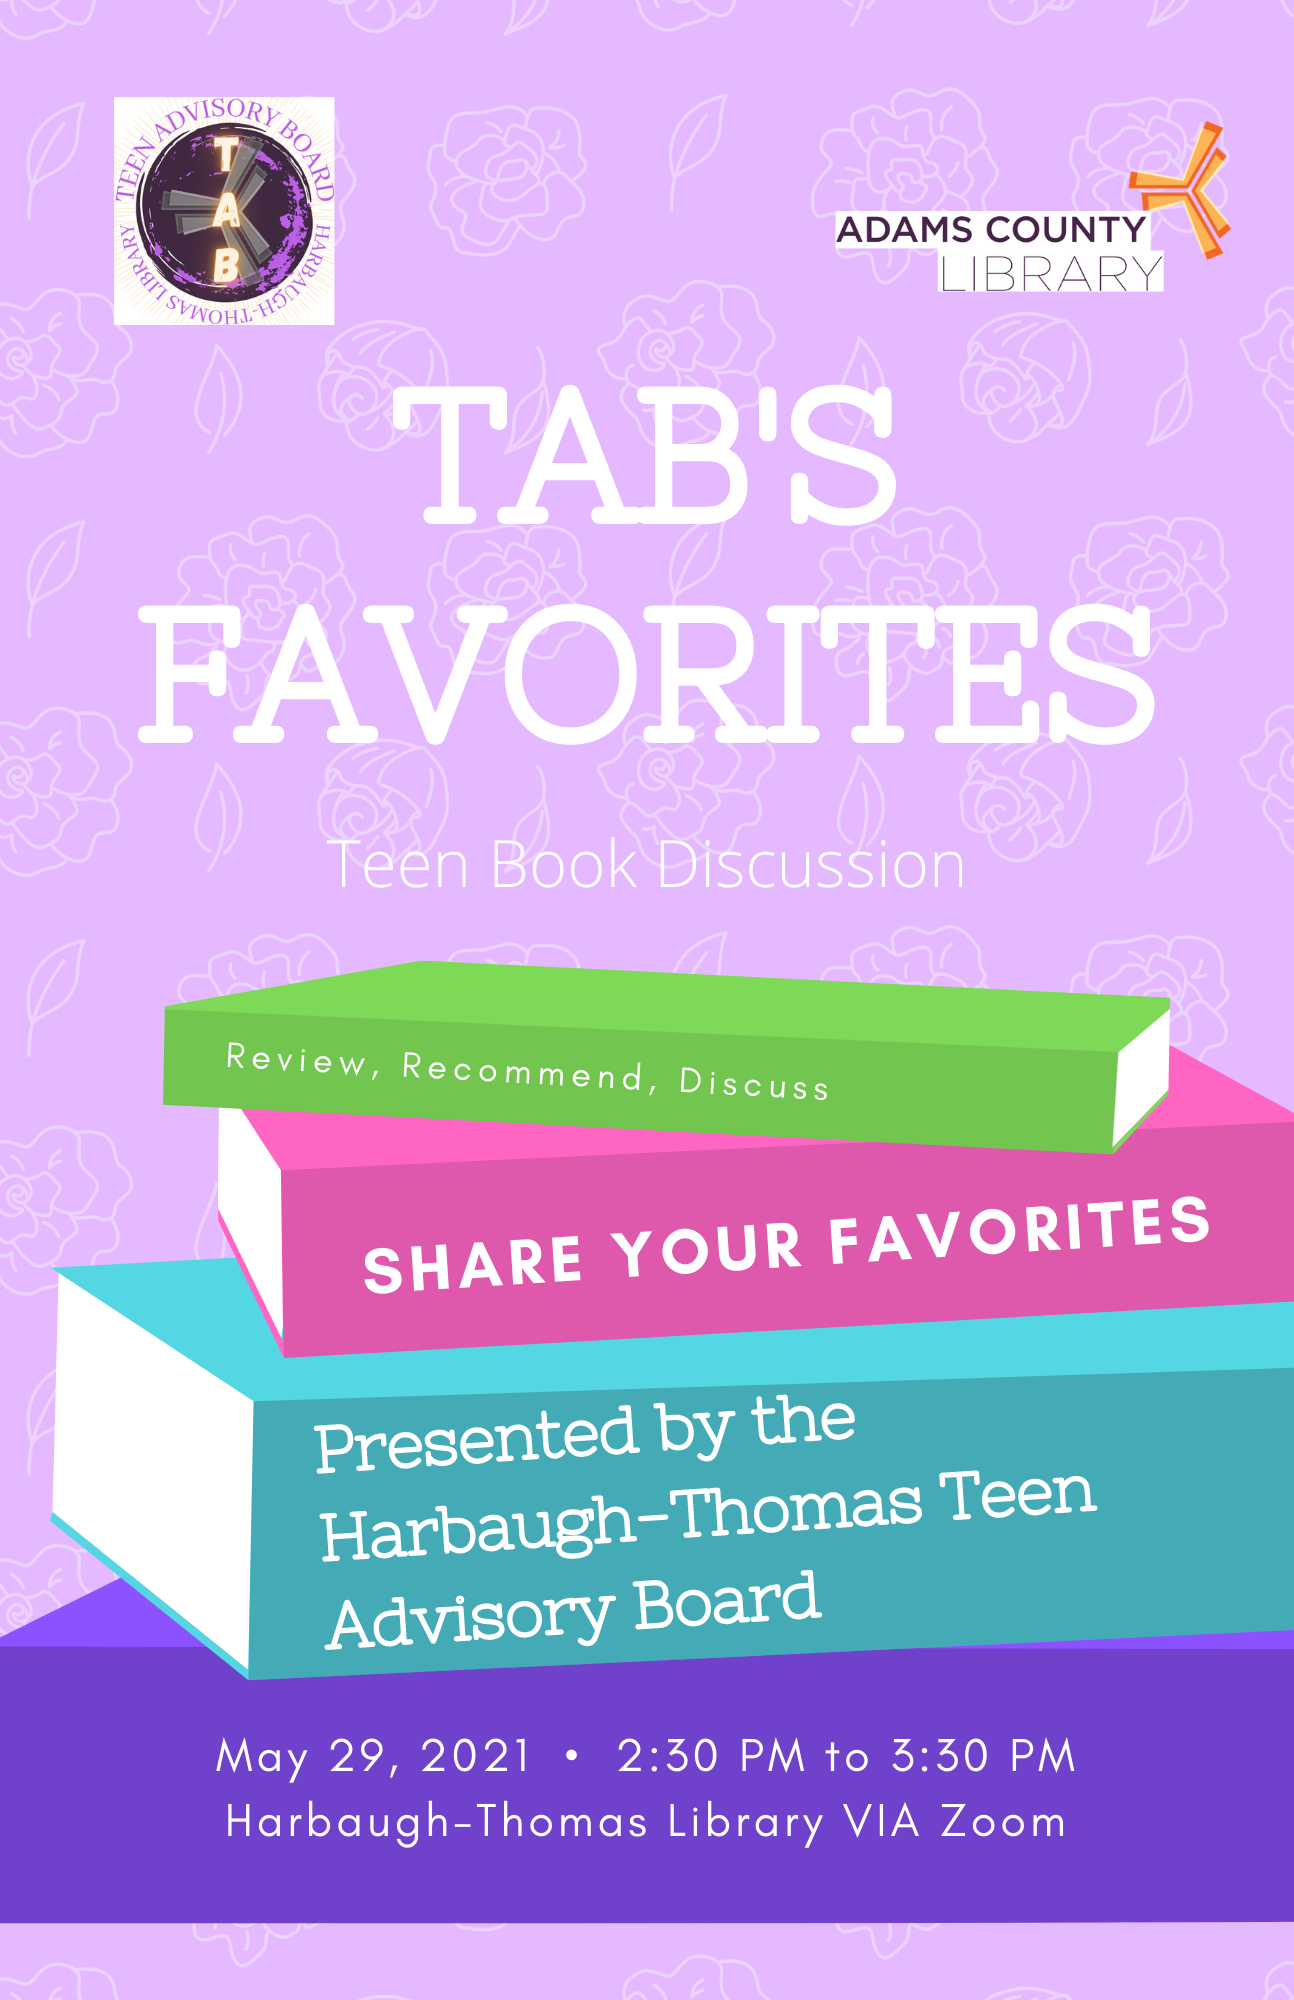 TAB's favorite book discussion